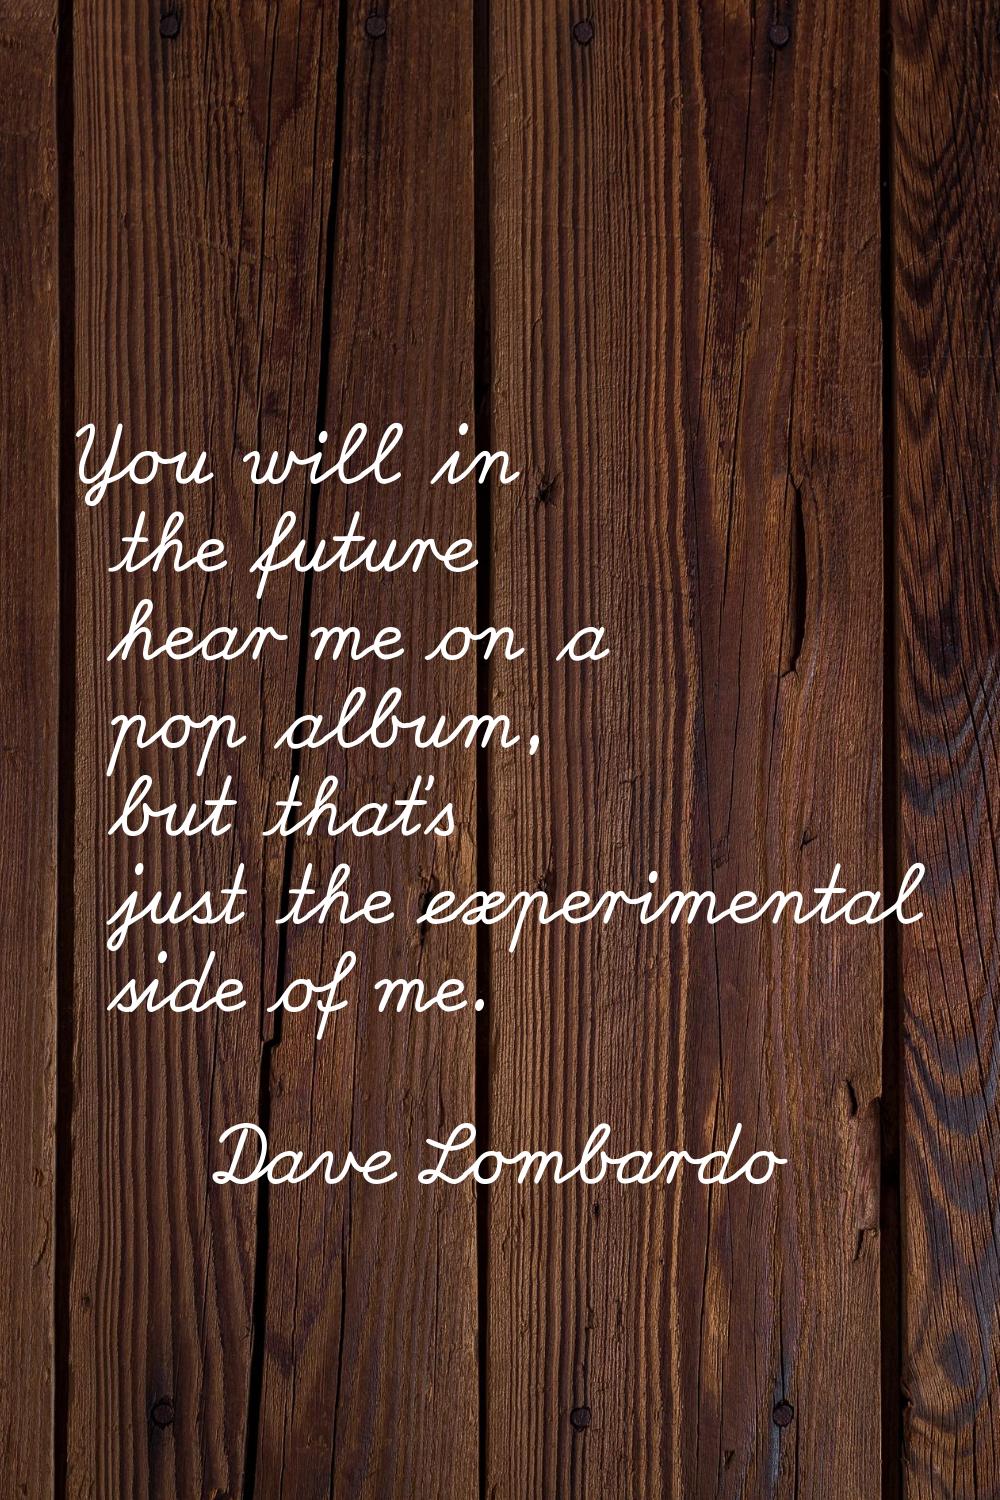 You will in the future hear me on a pop album, but that's just the experimental side of me.